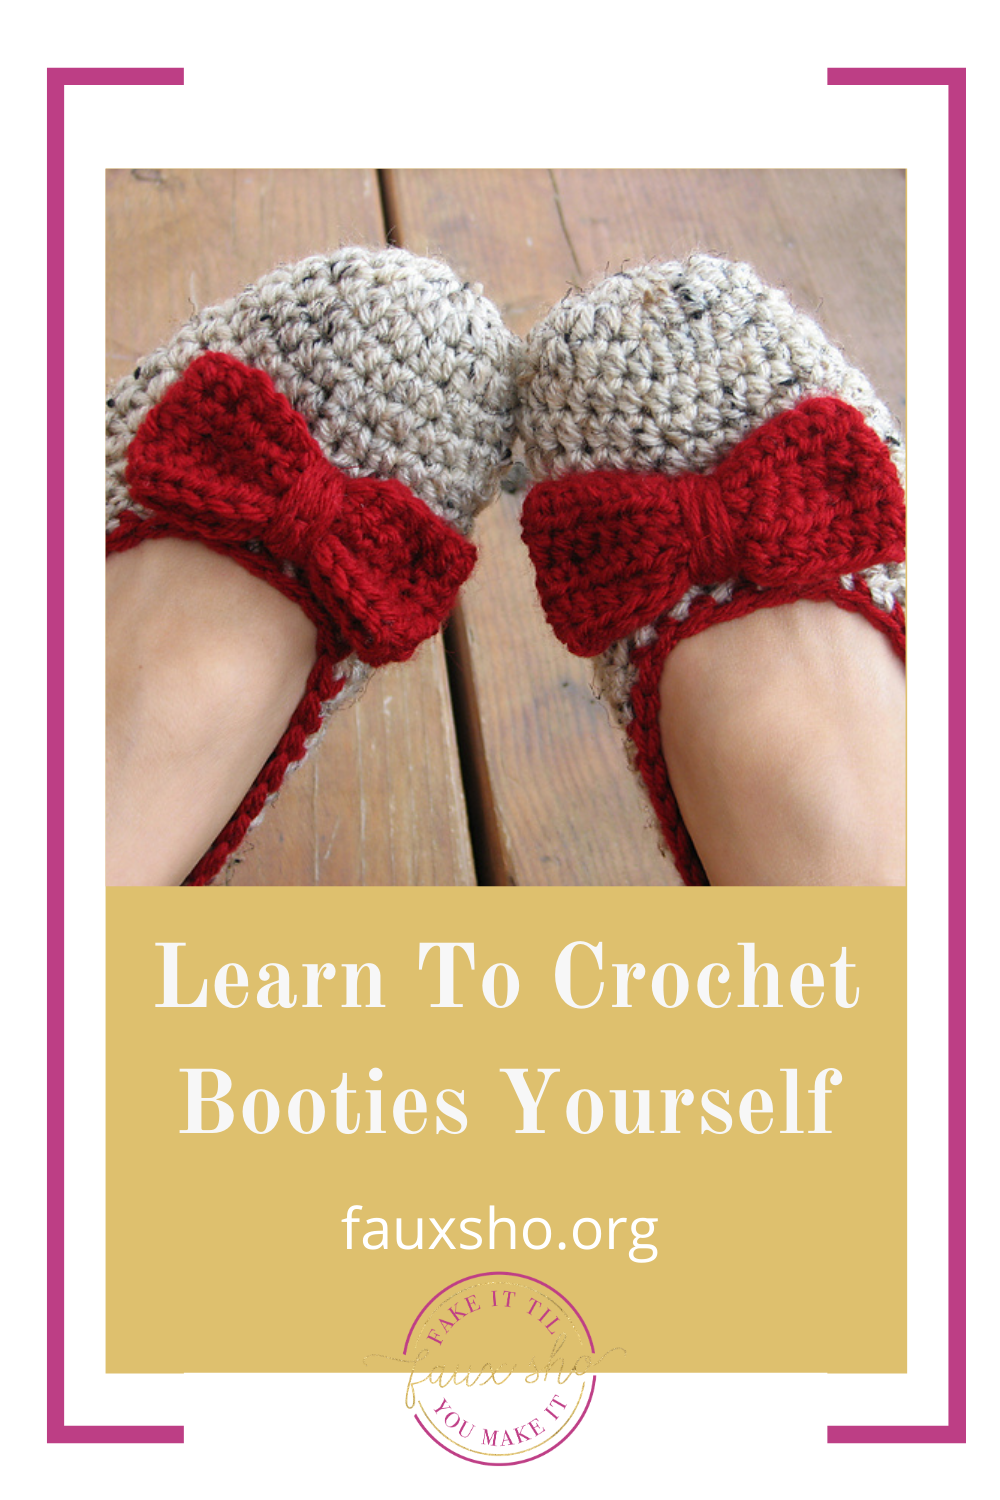 Fauxsho.org makes daily tasks a breeze. Find loads of simple hacks and DIYs to get a handle on your life. Learn how to crochet booties all on your own now!